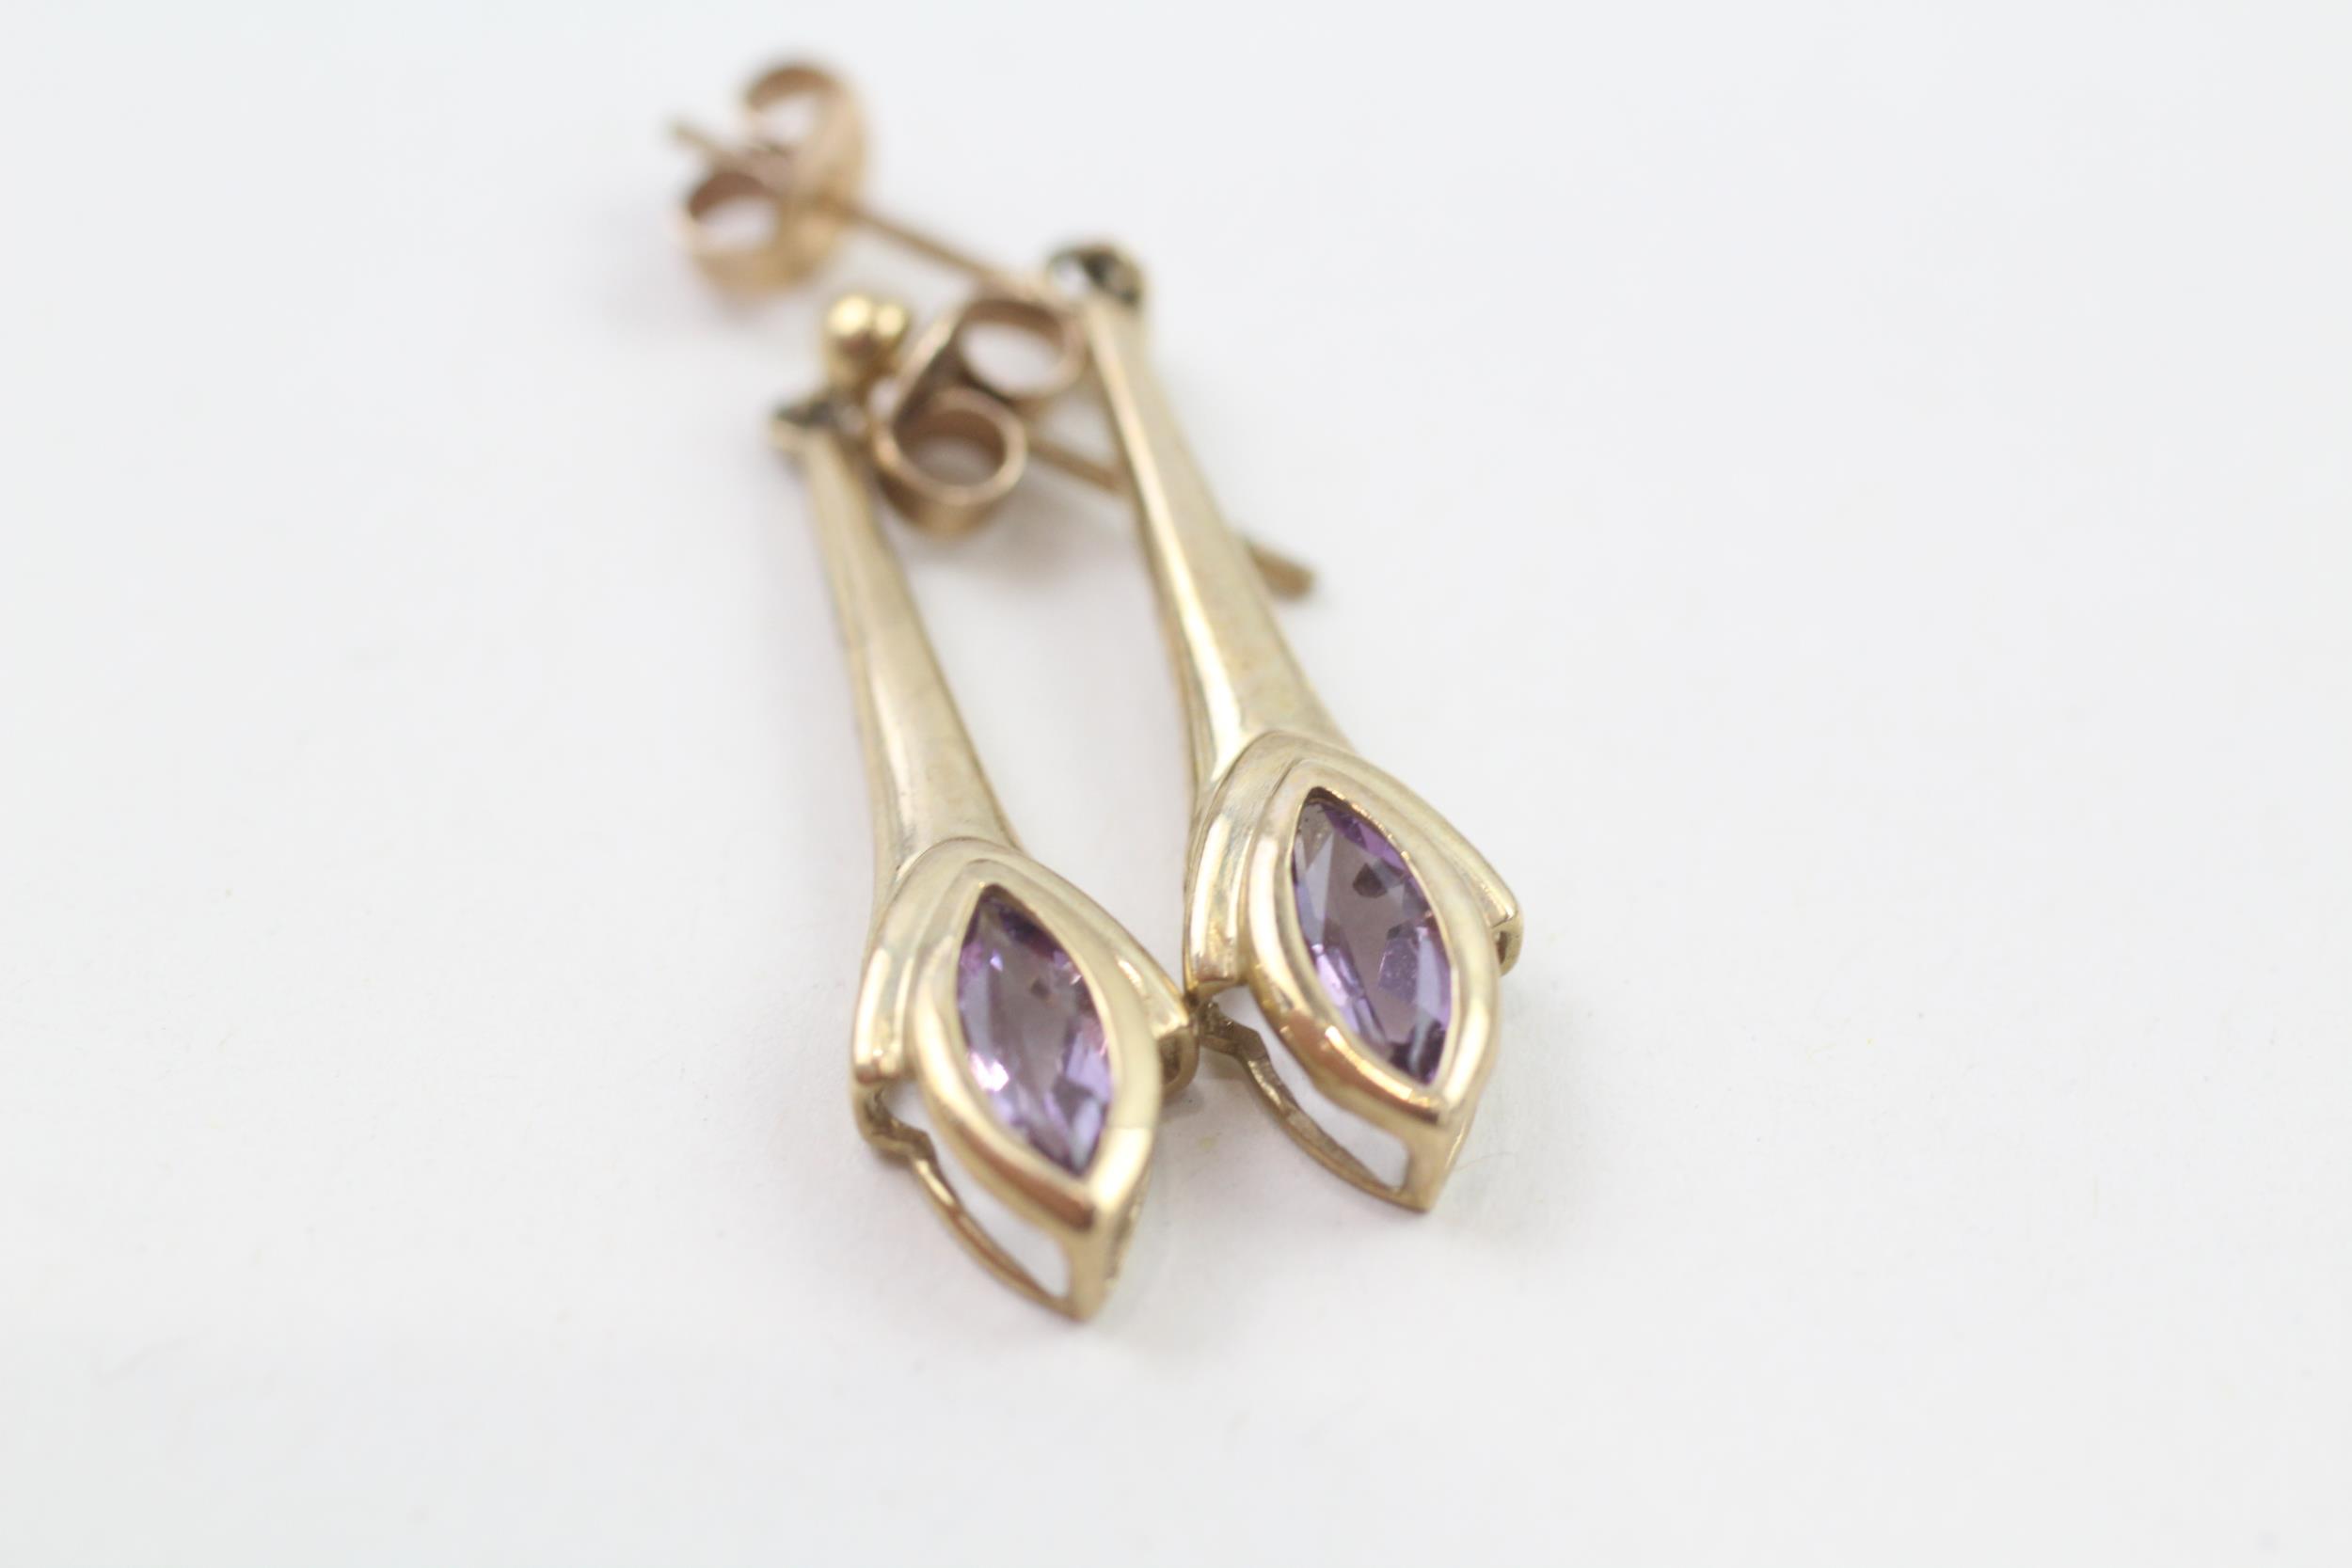 9ct gold marquise cut amethyst drop earrings with scroll backs (2.3g) - Image 3 of 4